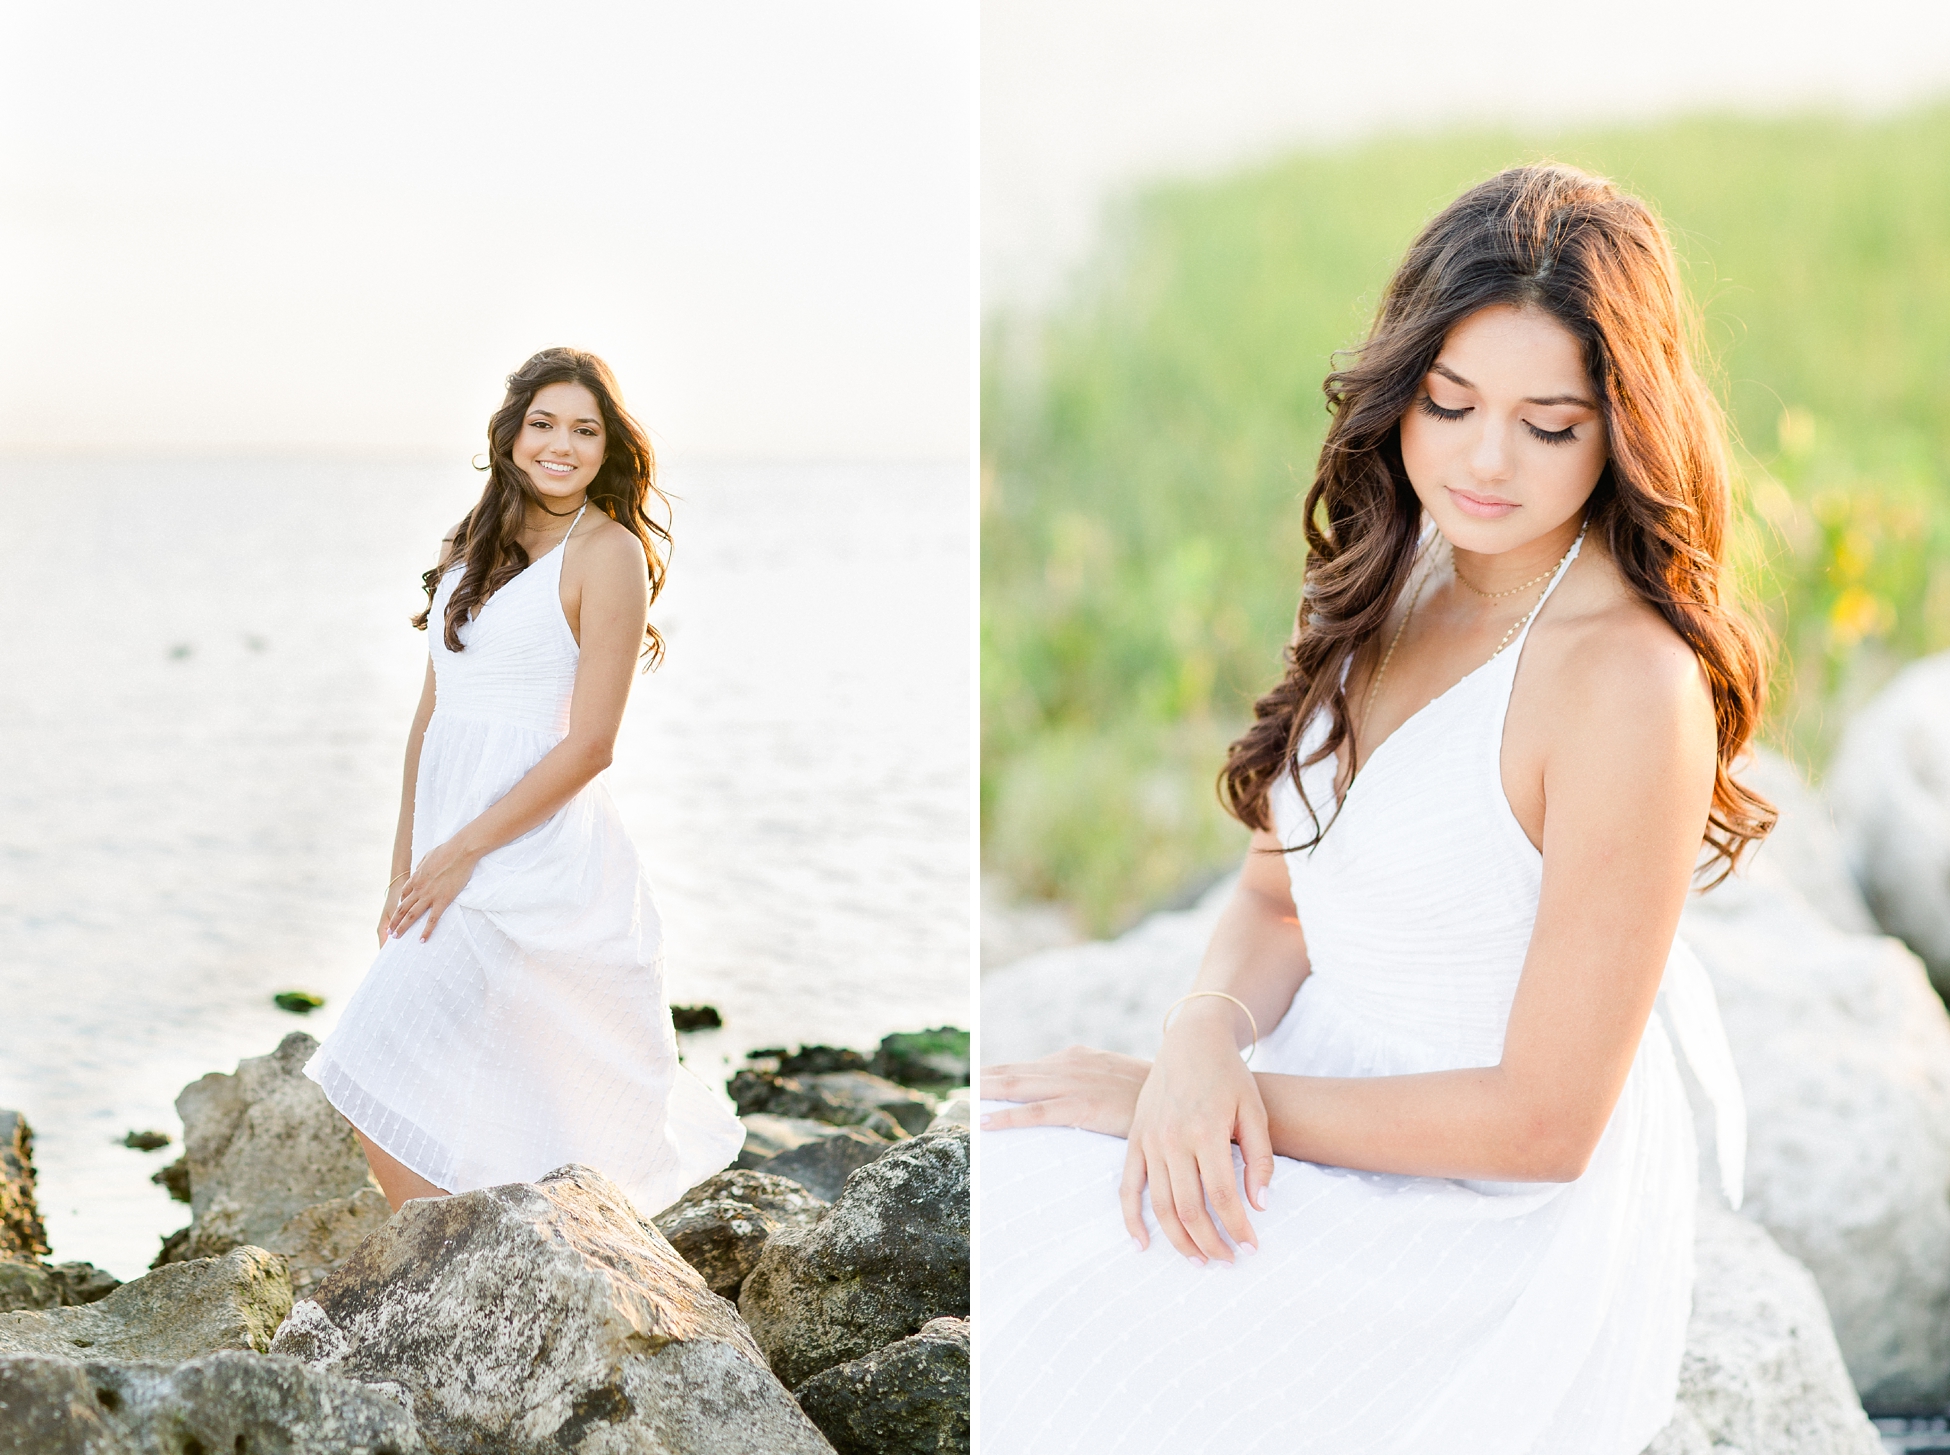 Tampa Senior photographer | © Ailyn La Torre Photography 2018